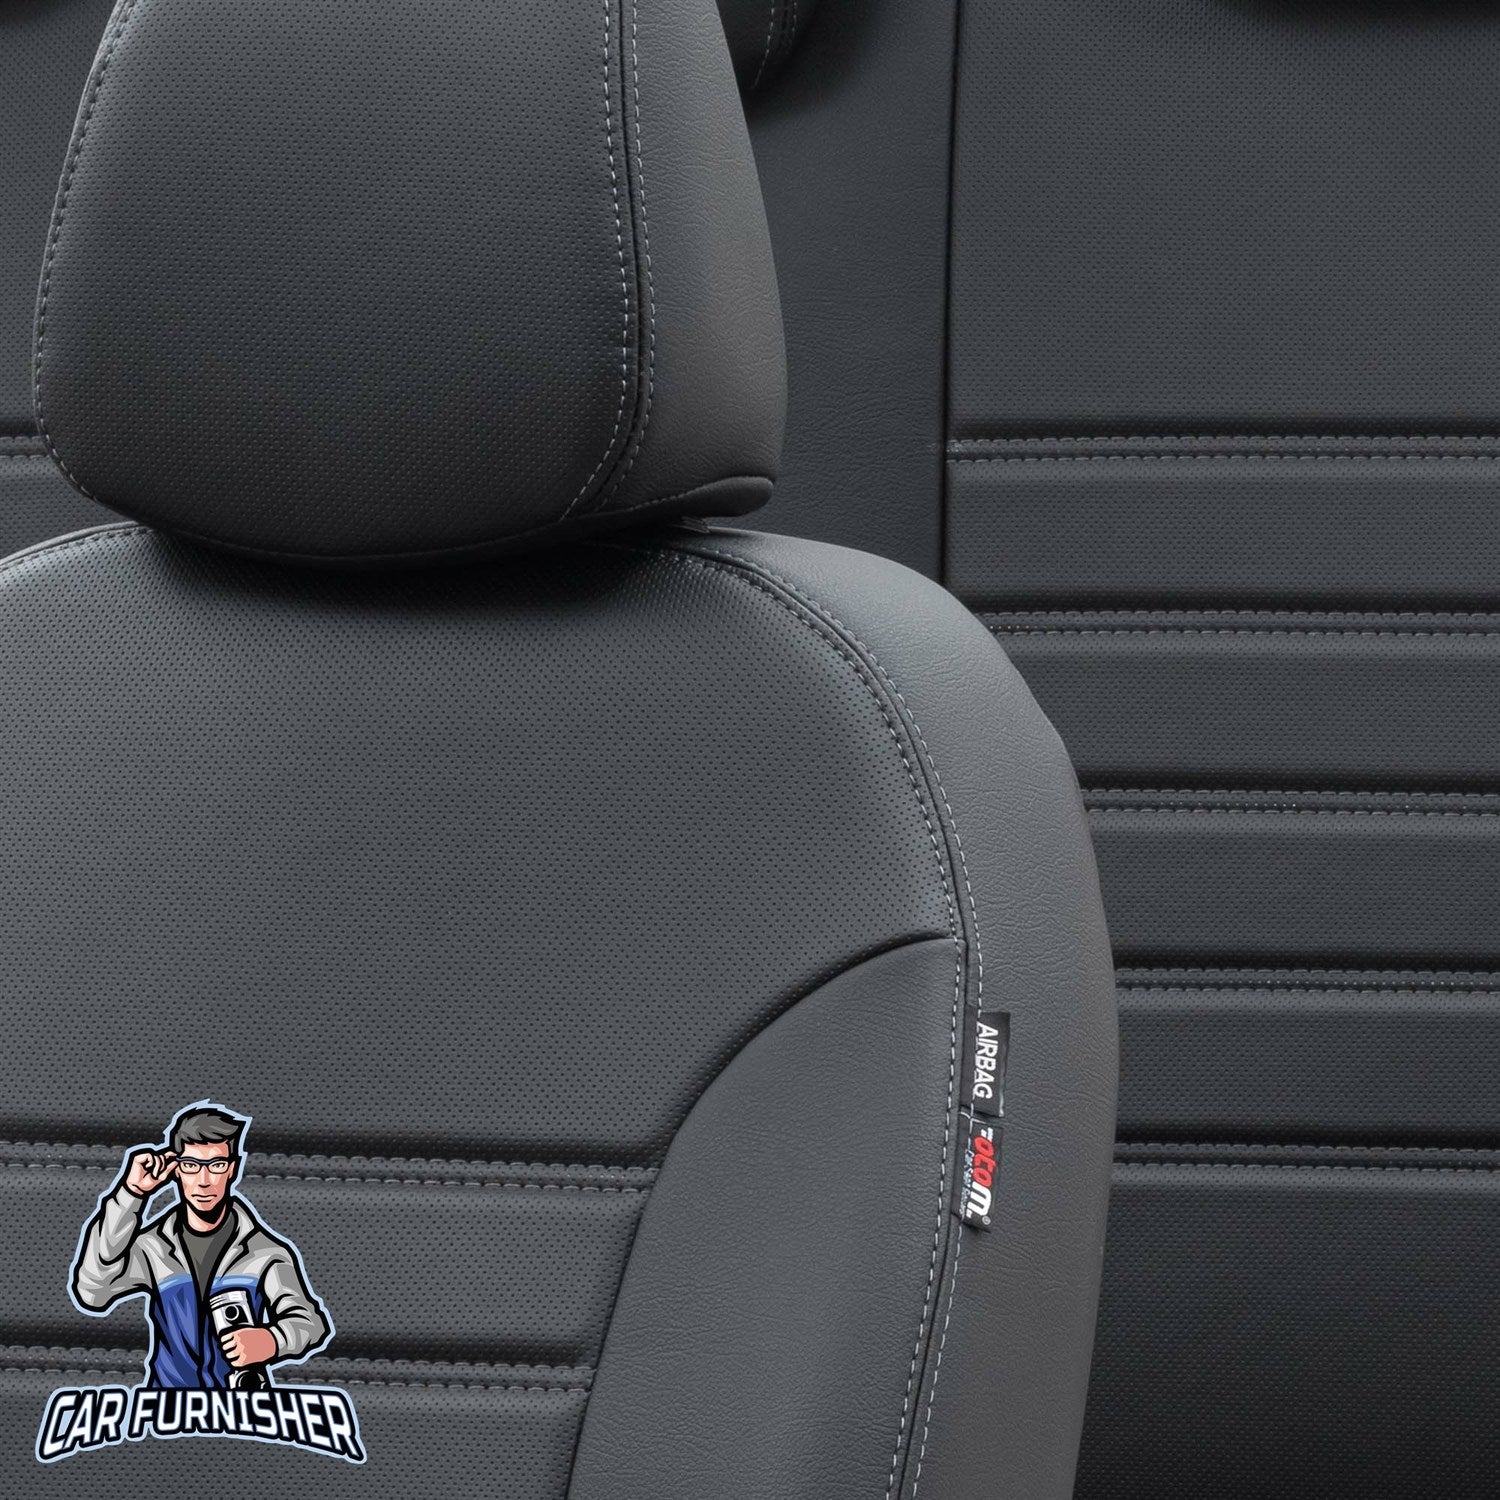 Seat Arona Seat Covers Istanbul Leather Design Black Leather